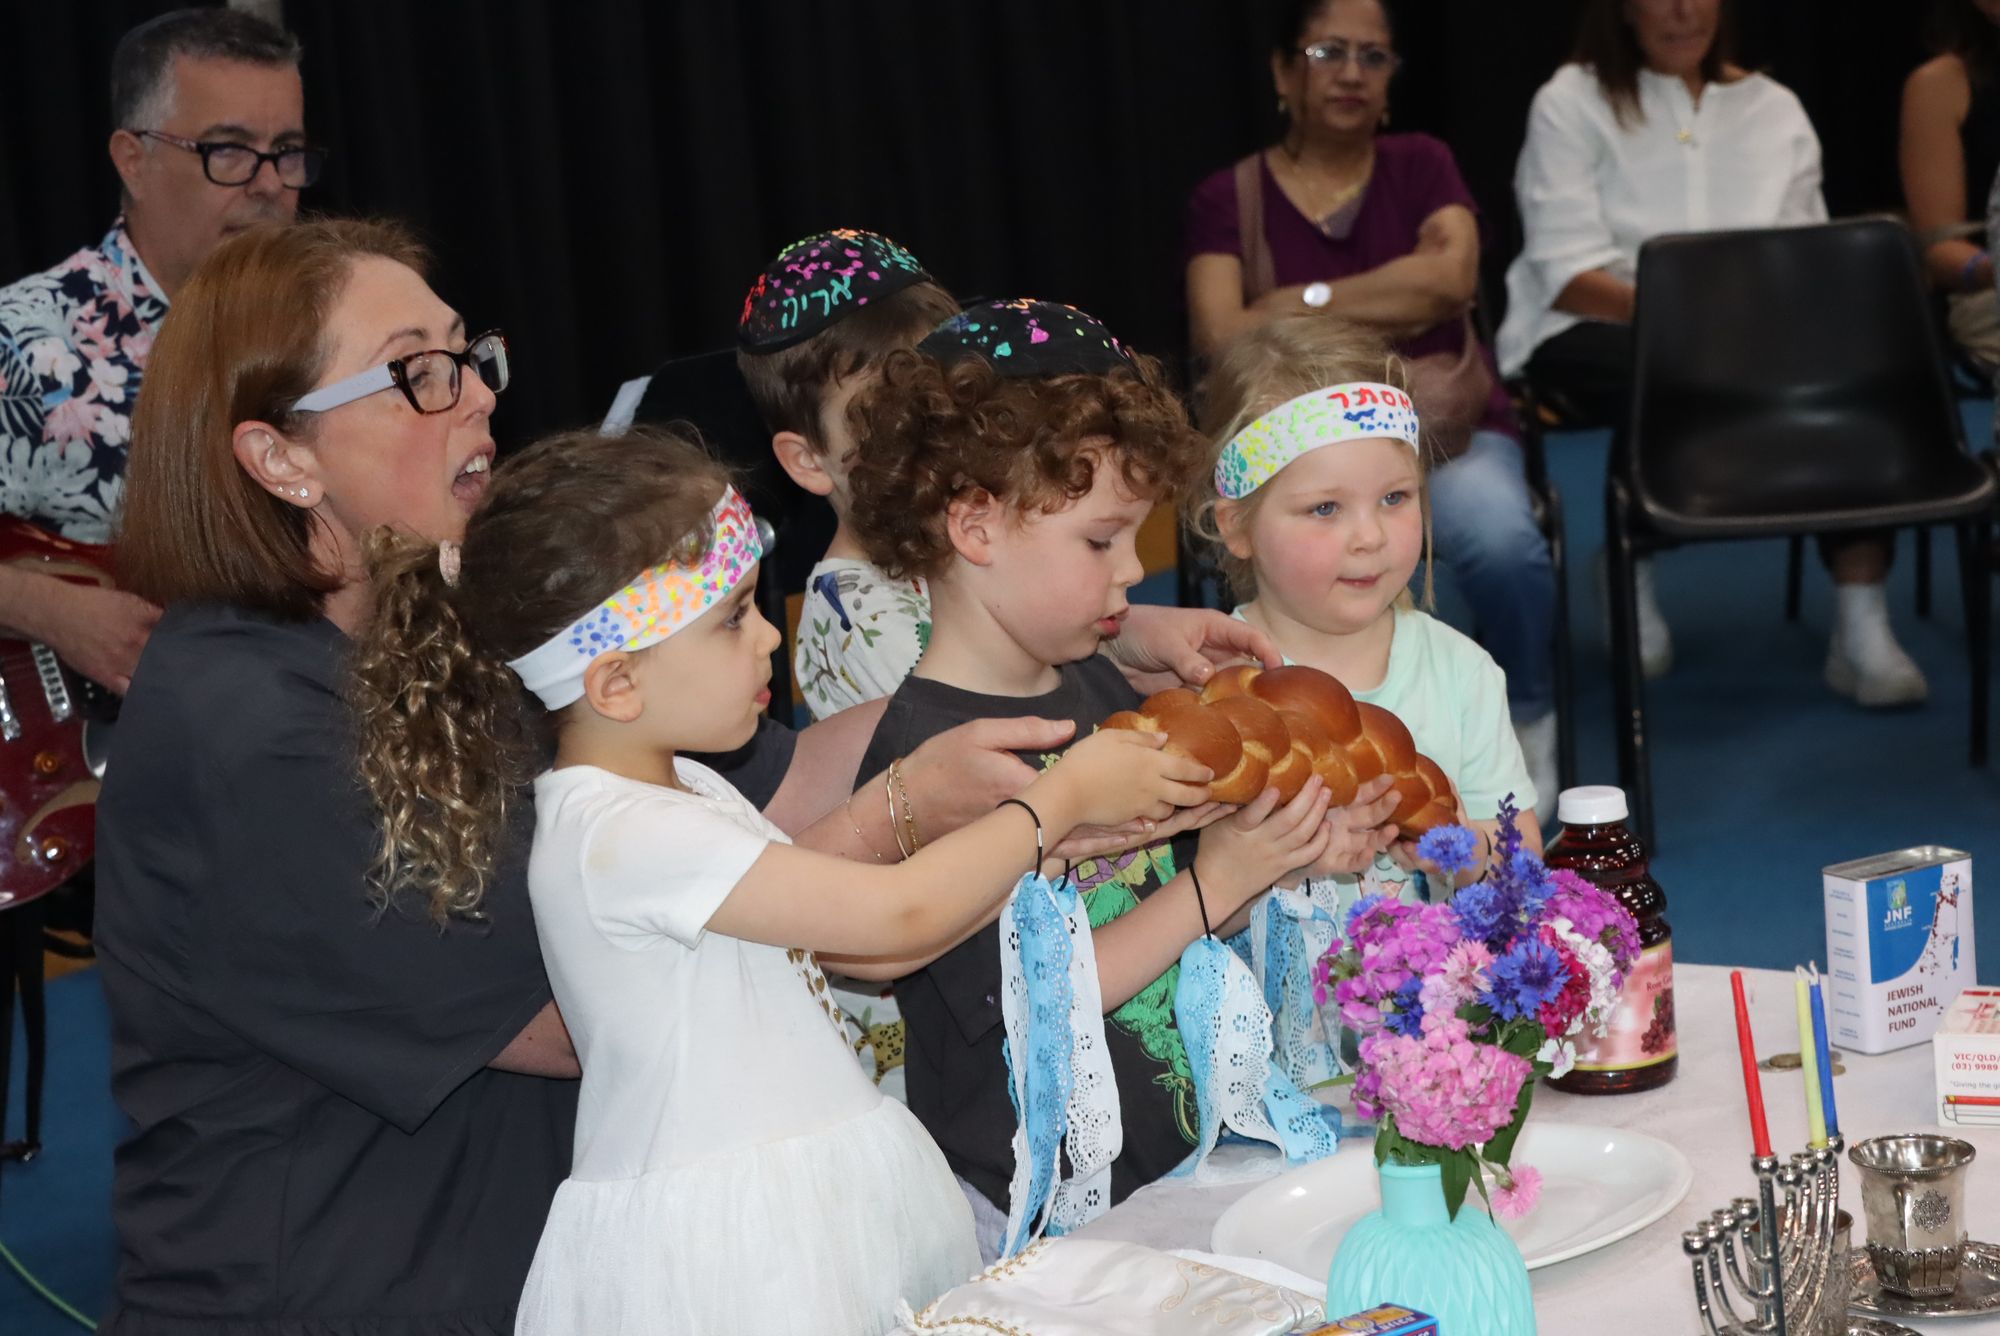 Junior Kinder students are celebrating their end-of-year Shabbat. They are holding challah and smiling near grape juice and Shabbat candles